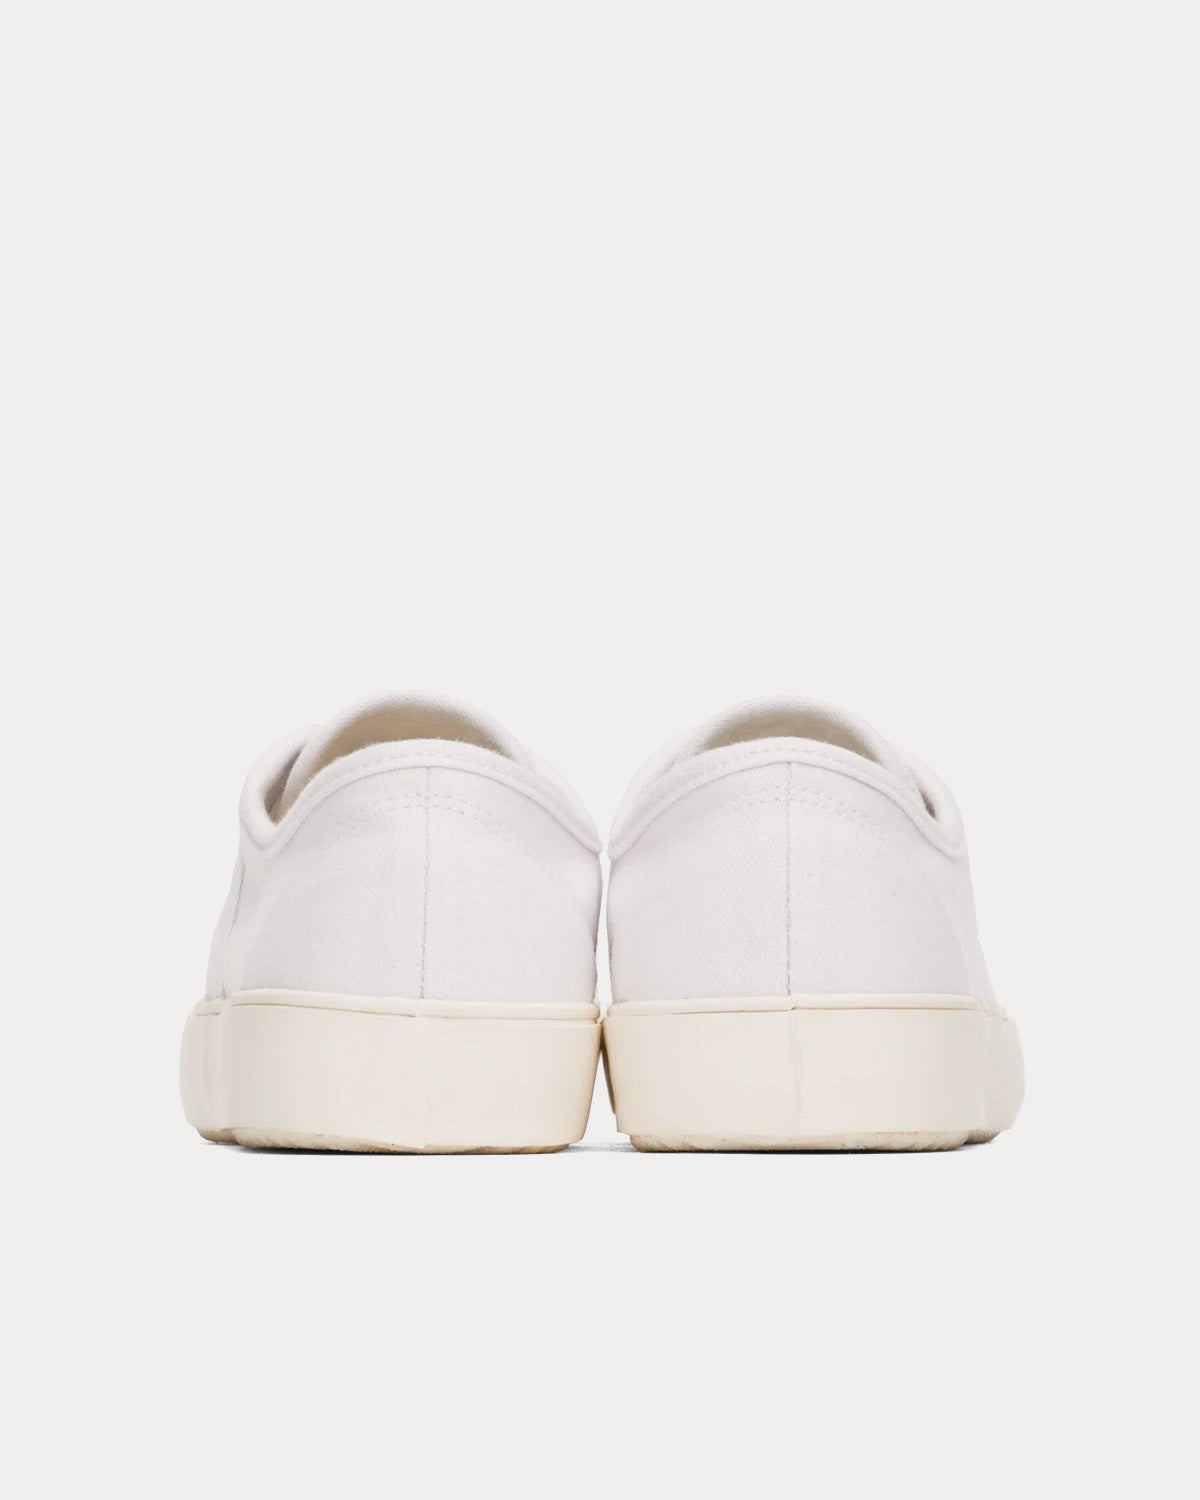 A.P.C. - Jane Canvas 'Jane Birkin Edition' White Low Top Sneakers